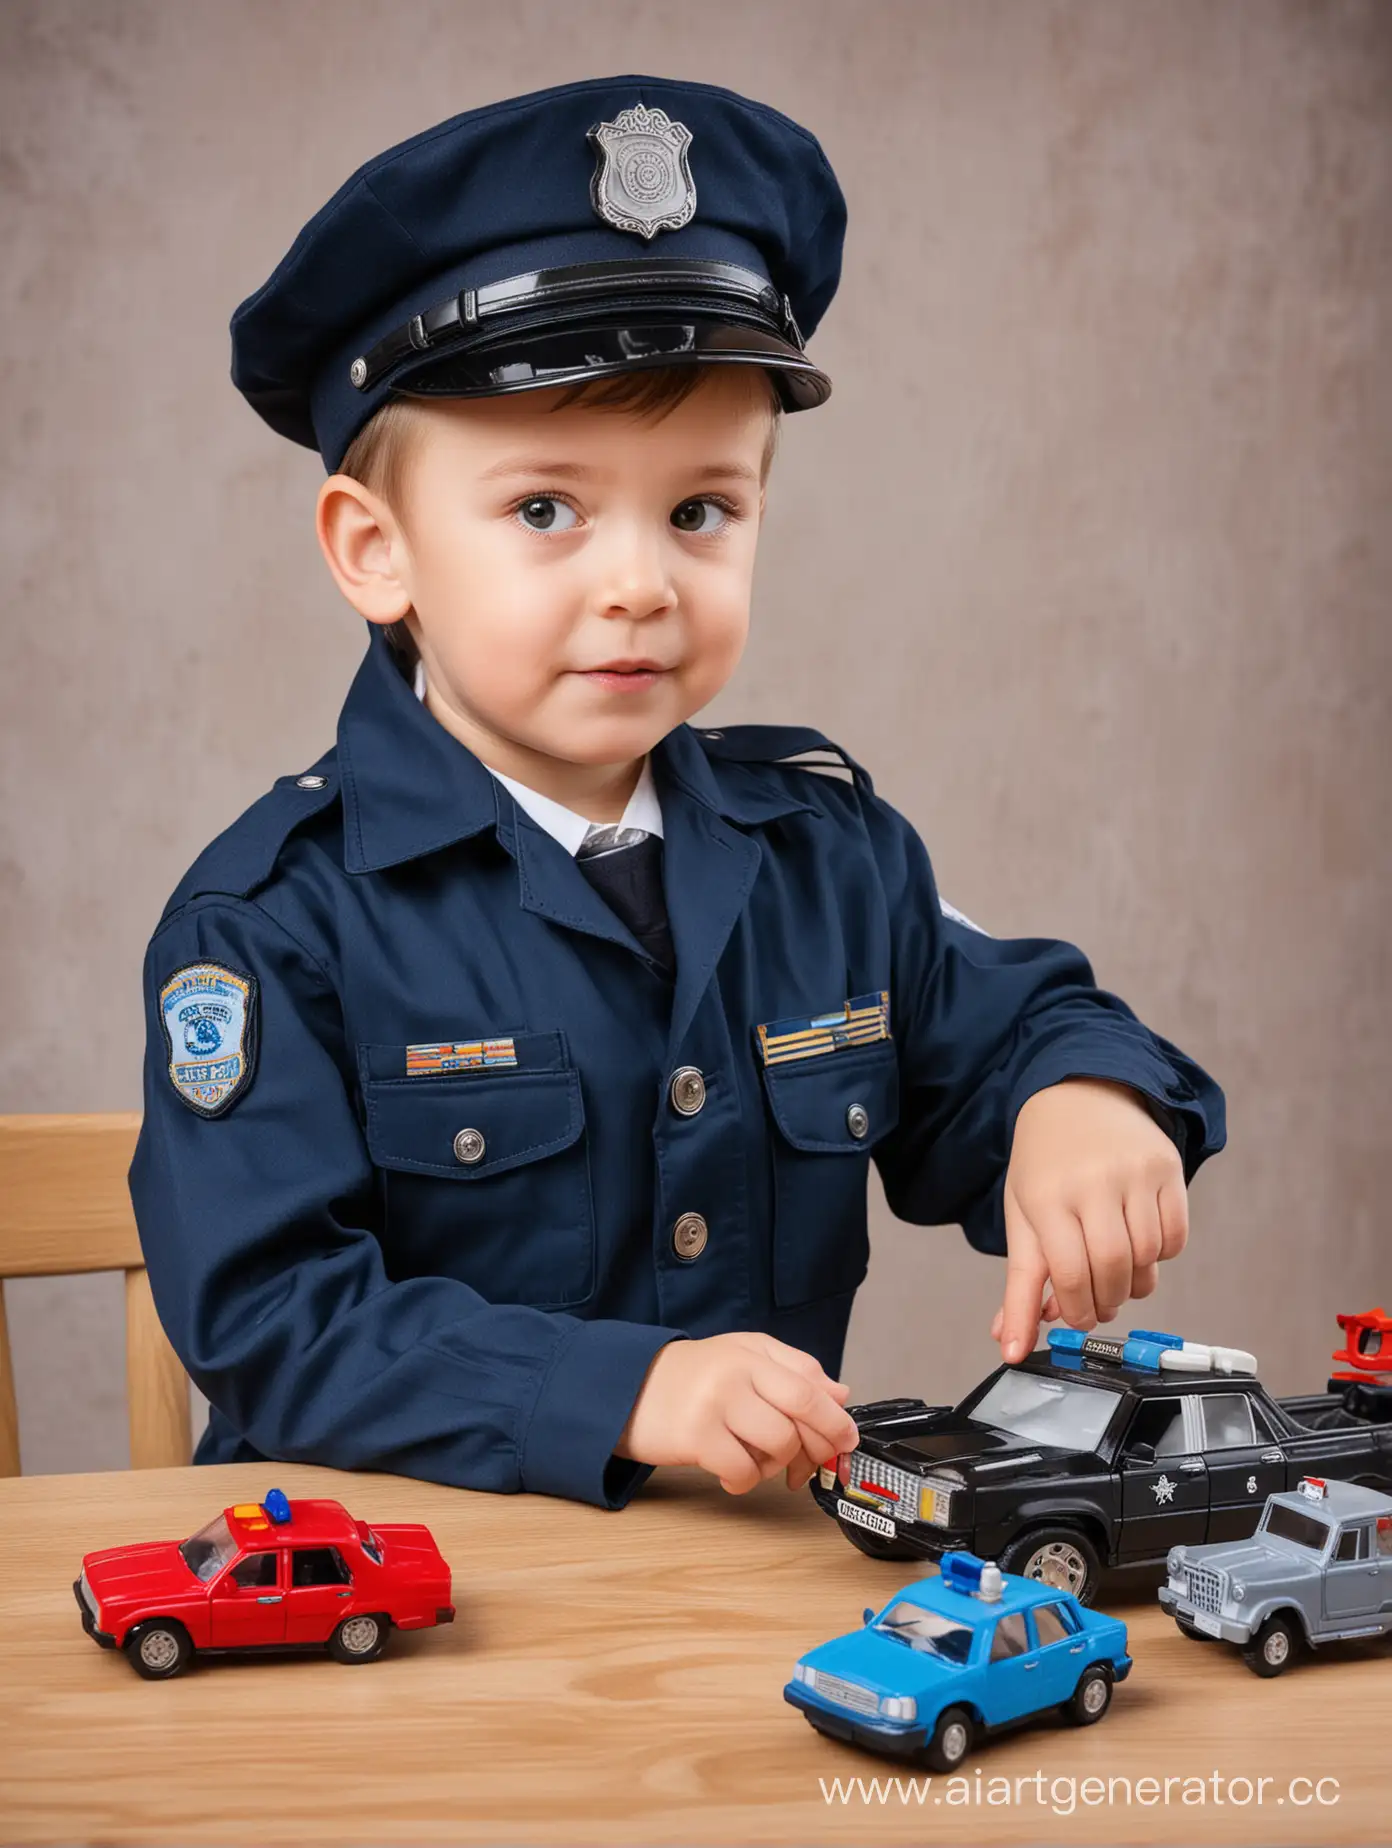 little boy dressed as a policeman plays with cars at the table